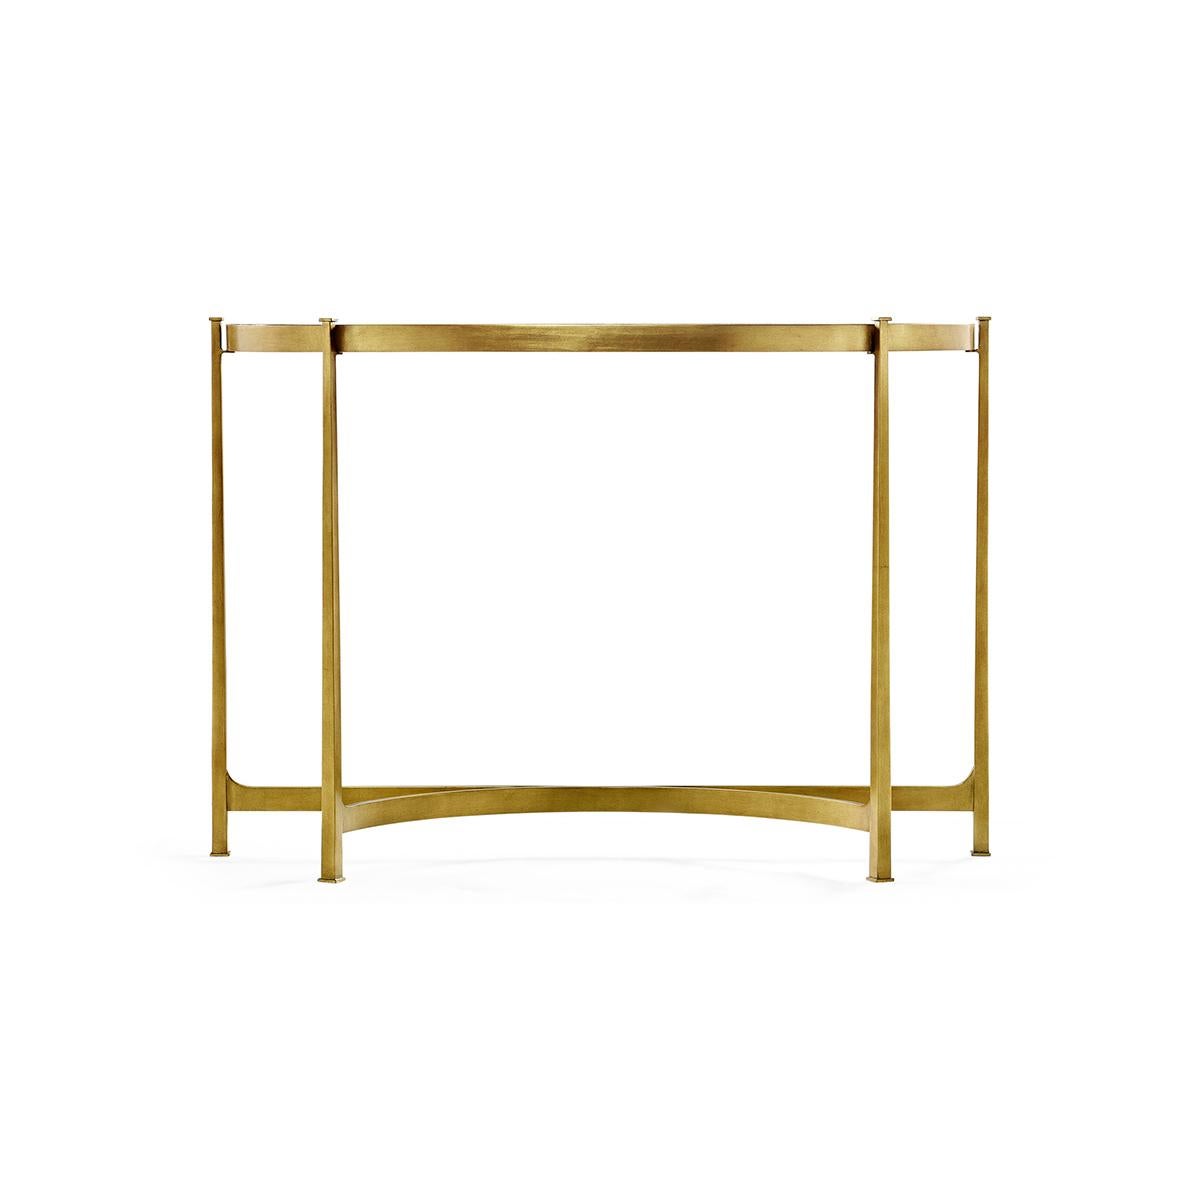 Art Deco Gilded Demi Lune console table. Crafted from wrought iron, it features an antique gilded finish and a stunning églomisé top. With dimensions of 48.25